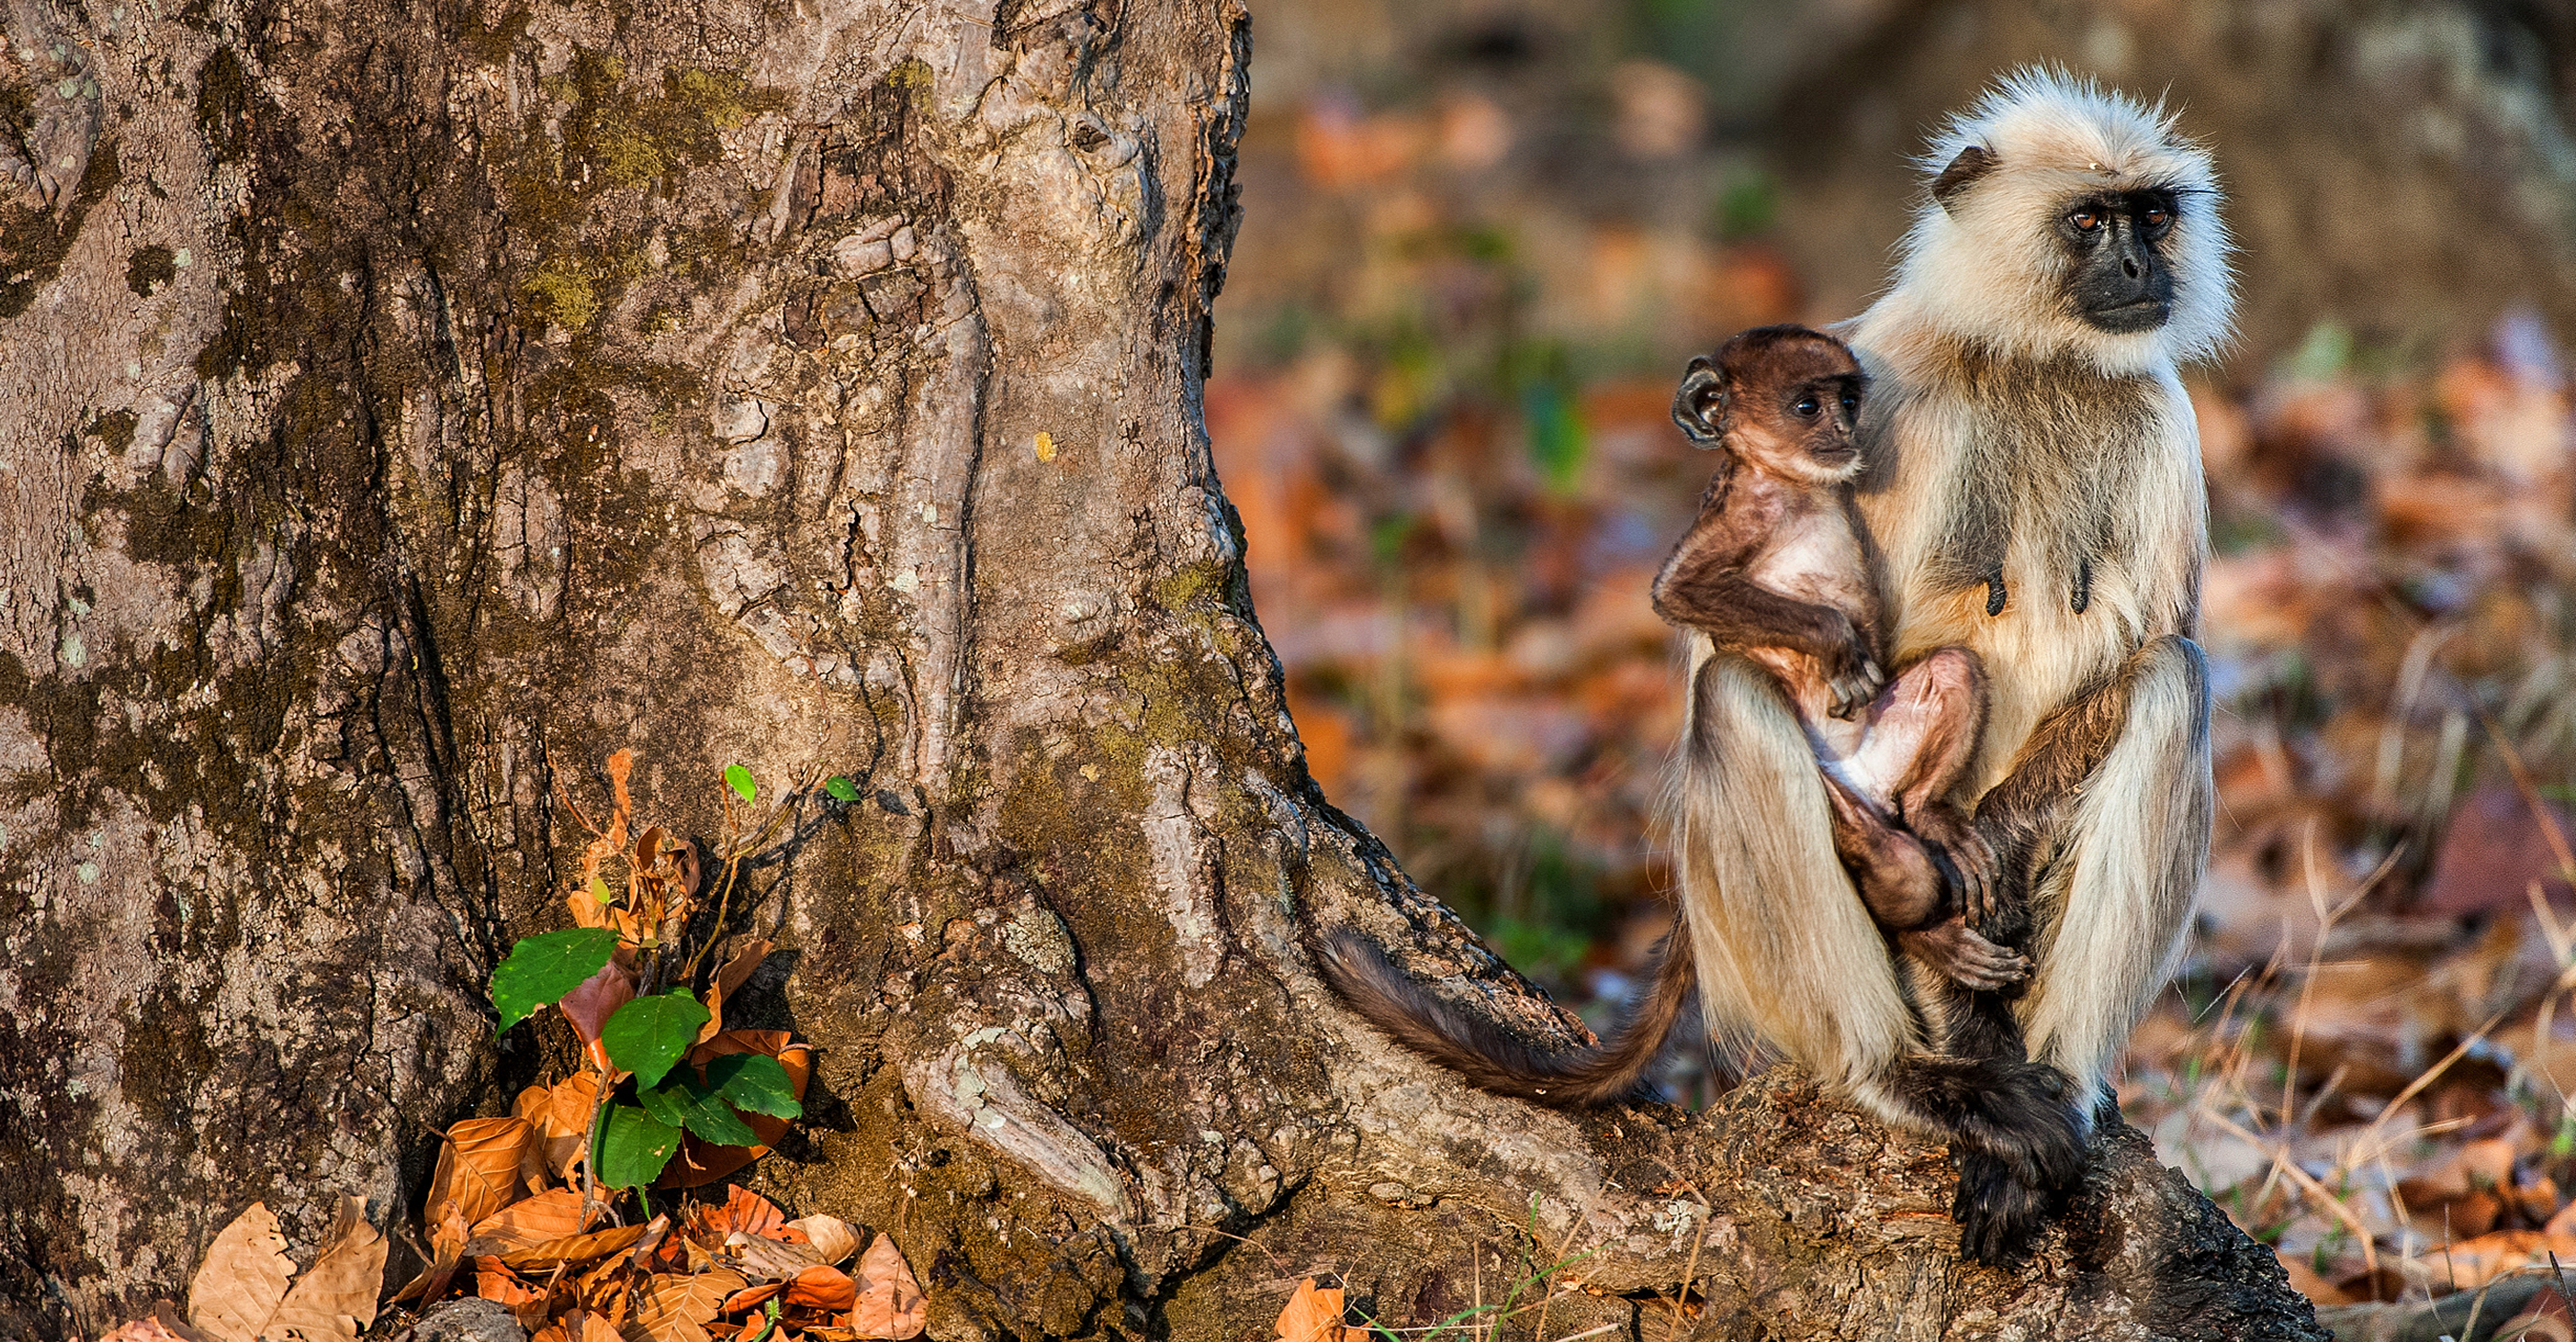 A langur monkey and her baby sit together in Ranthambore National Park, India